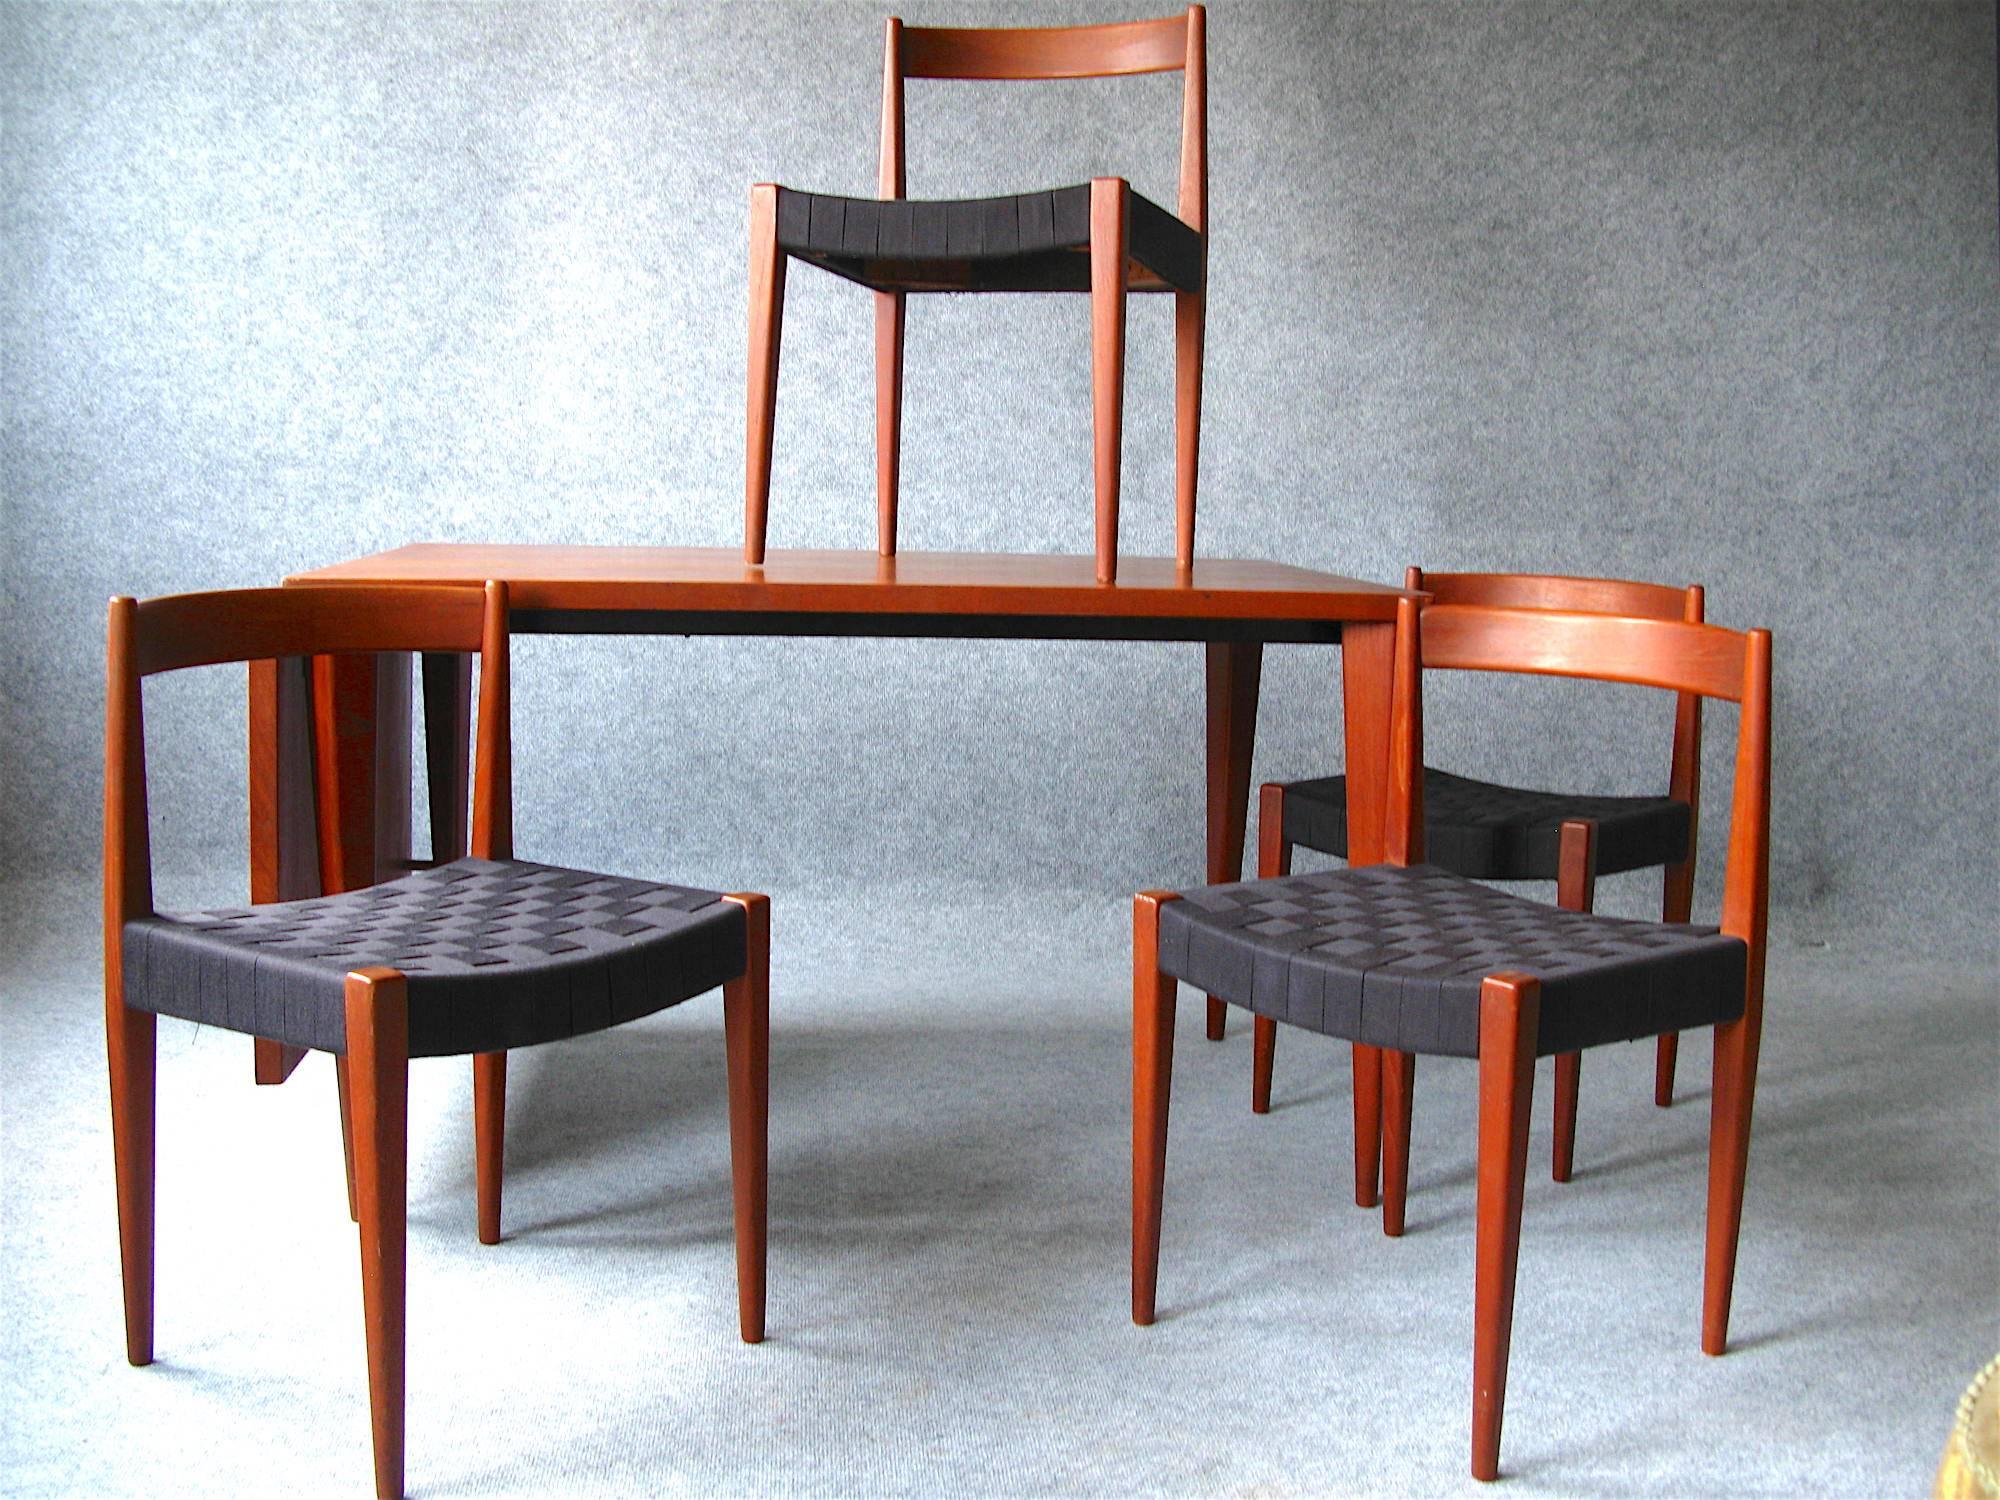 Nanna  & Jørgen Ditzel

Four chairs Model PKS 110 and One Table model PKS 144 with one side dropleaf  out of Teak made by Poul Kolds Savværk.

dimensions: table Tisch 70 x 120 /170 x 80 cm chairs: 70 x 43 x 40 cm

Lit.: Neue Form aus